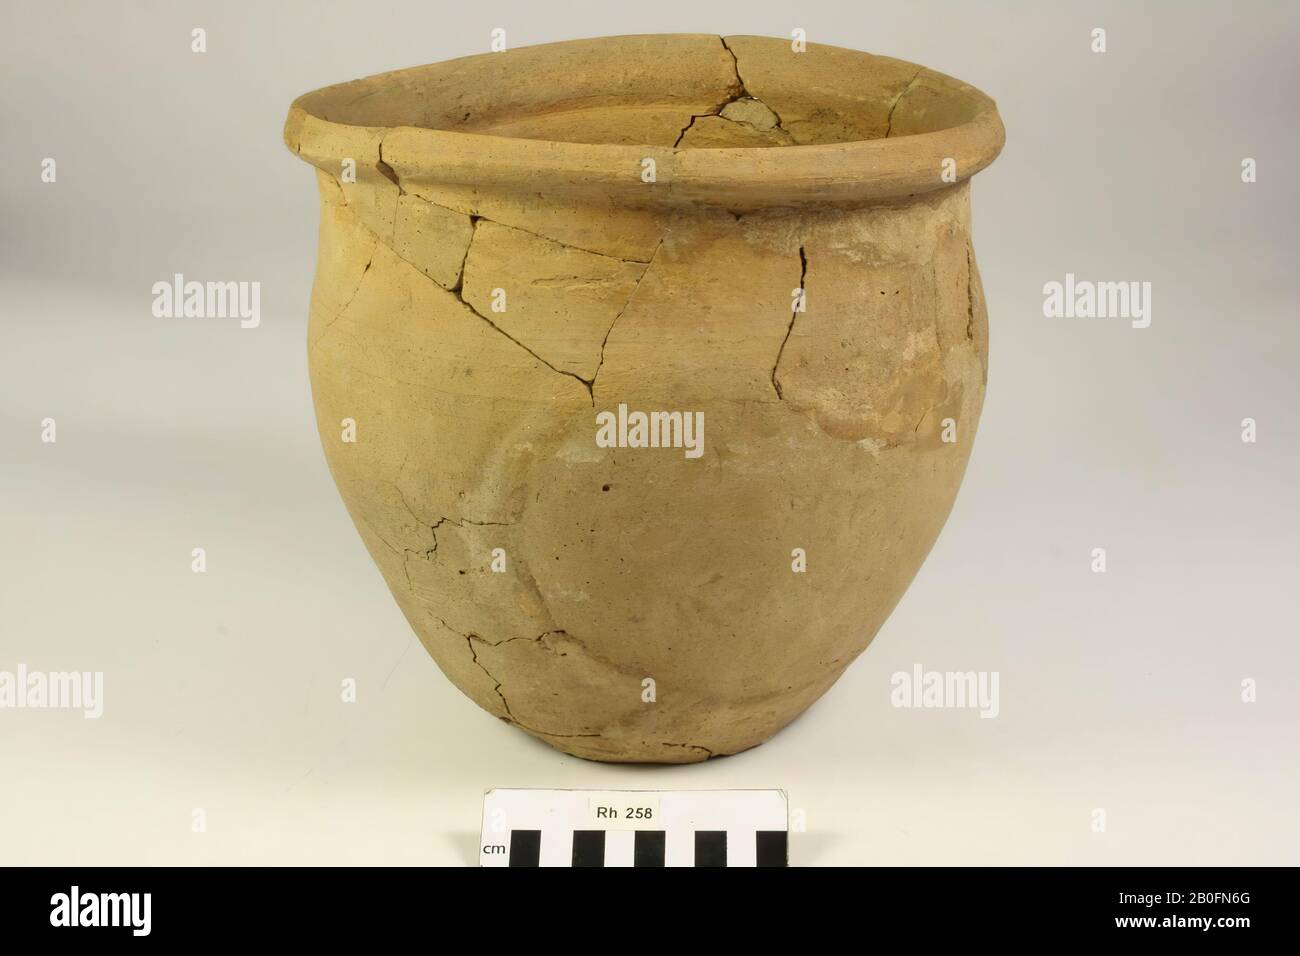 Pot with old glues and additions, in addition also loose cracks., Pot, earthenware (rough wall), h: 23.8 cm, diam: 25.5 cm, vmeb, Netherlands, Utrecht, Rhenen, Rhenen, grave 258 Stock Photo